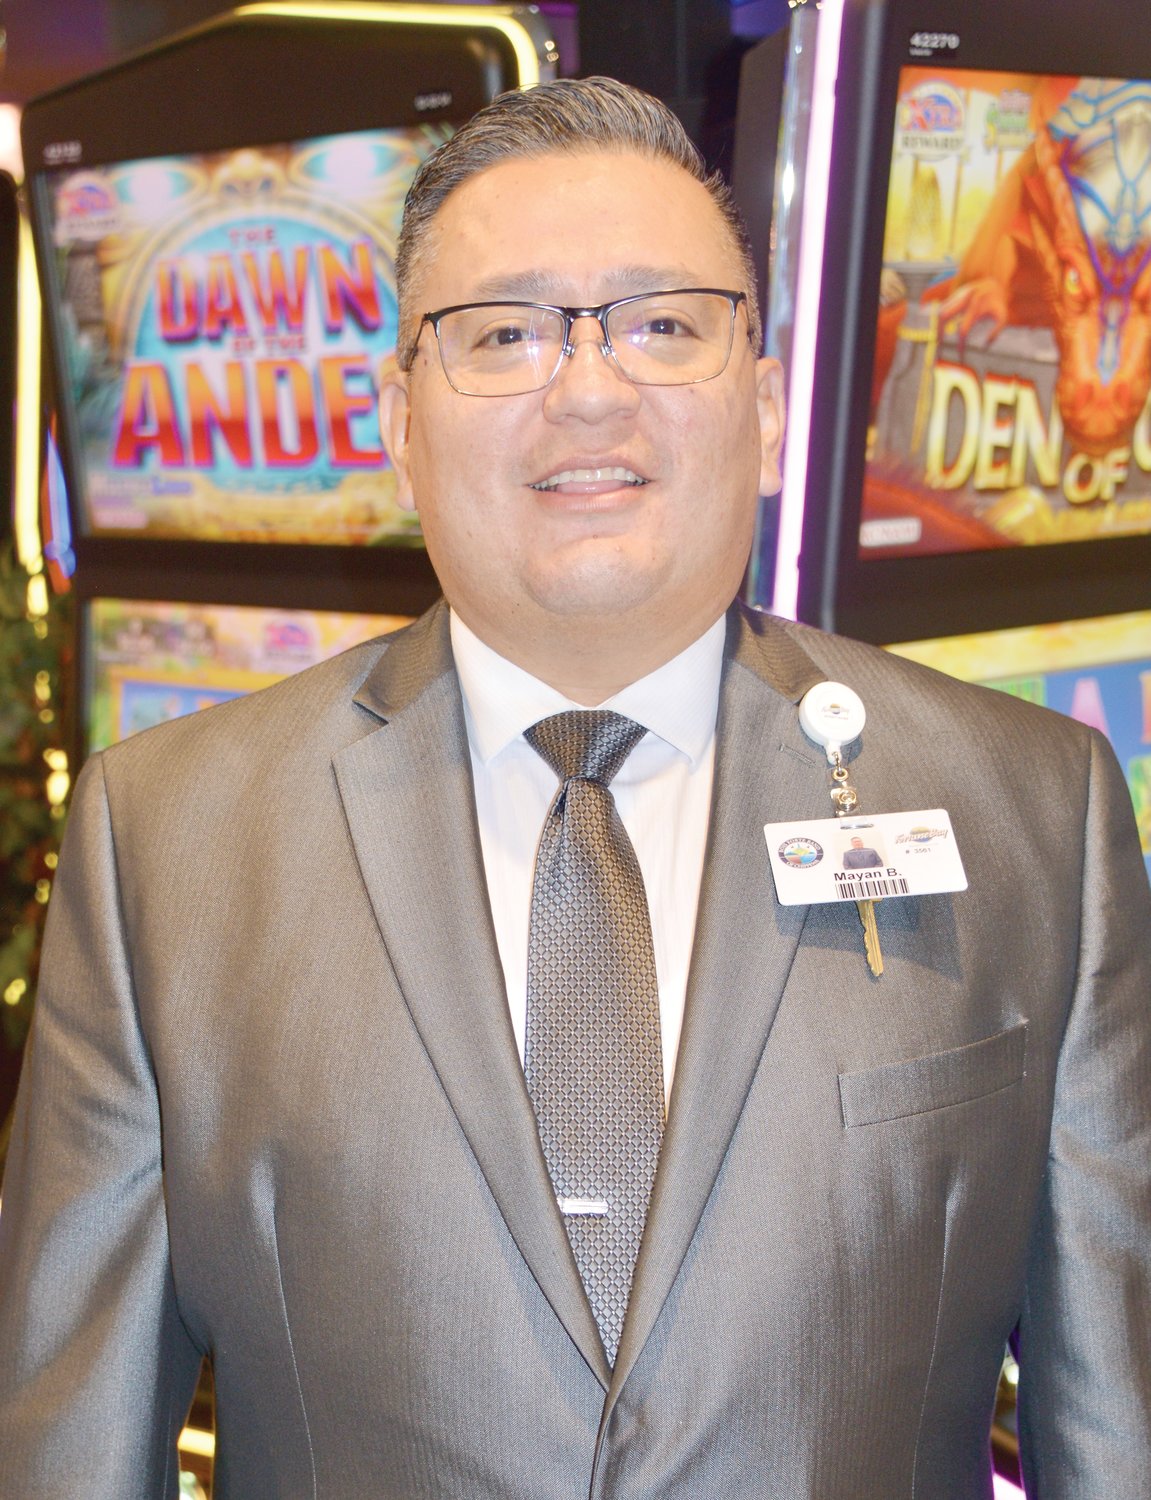 Mayan Beltran is the new general manager at Fortune Bay Resort Casino.